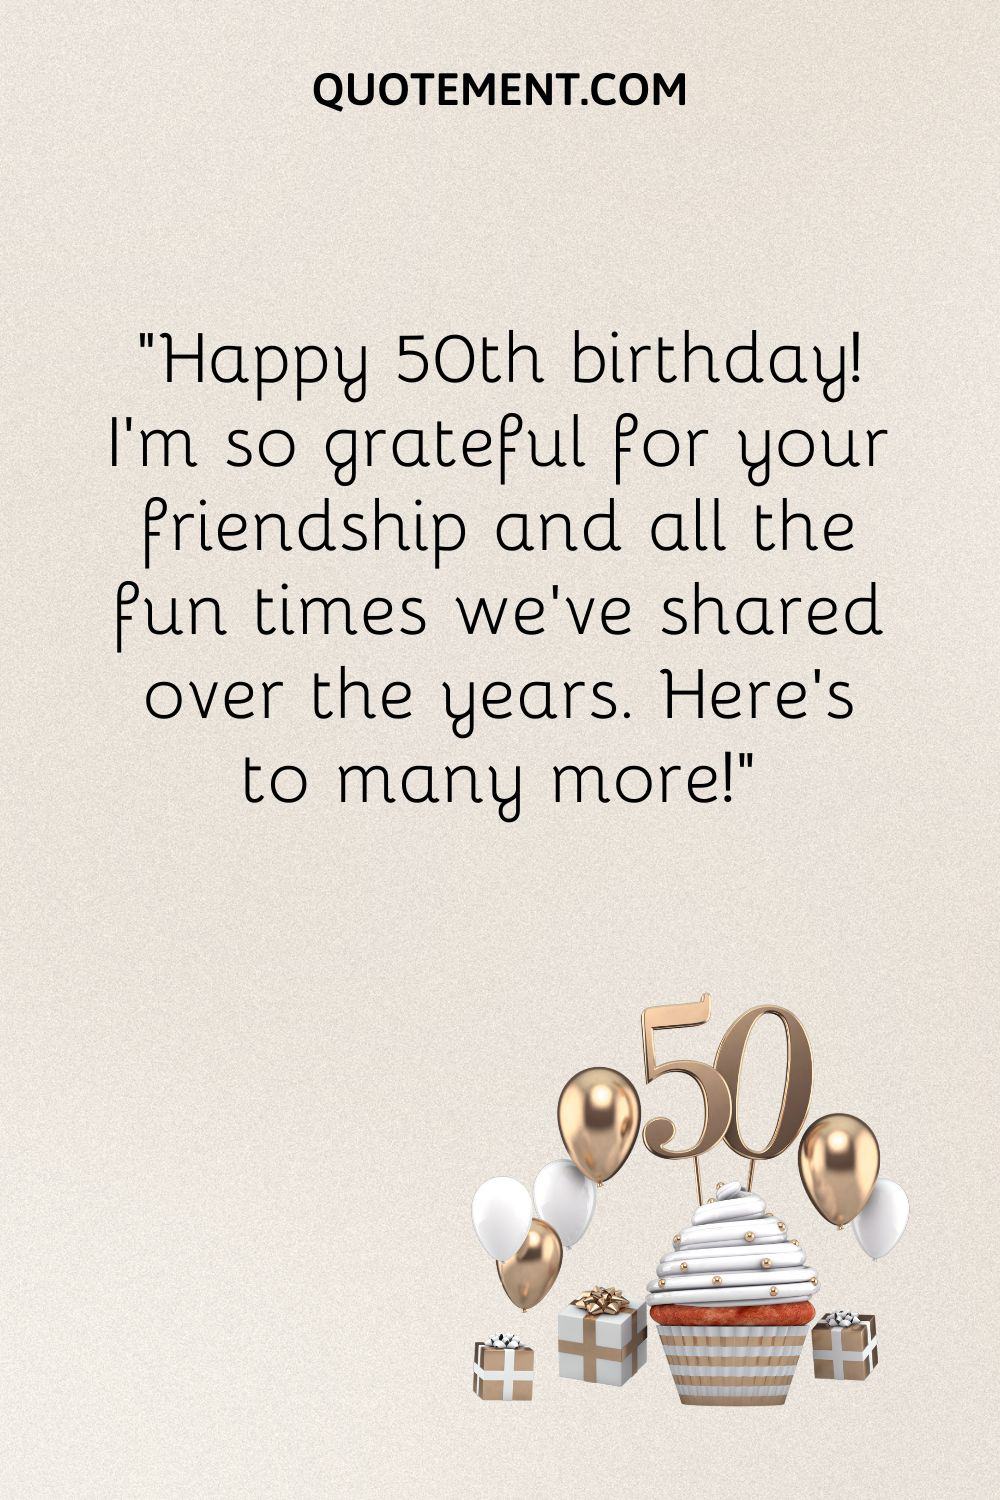 cupcake with balloons and gifts image representing 50th birthday wish for a friend